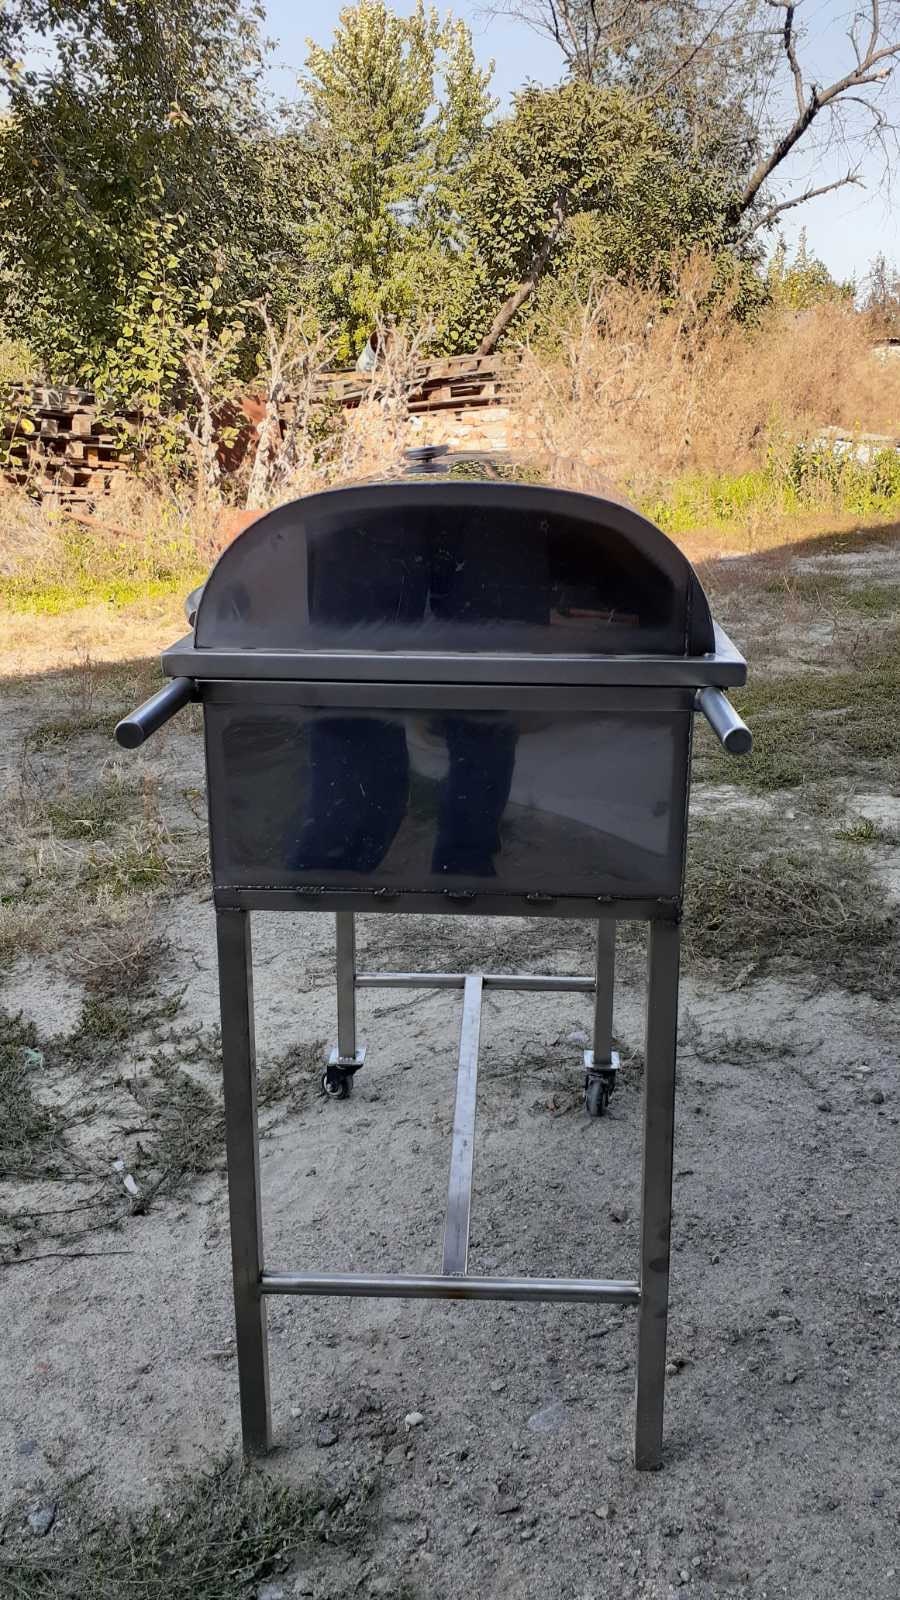 Grill, mangal, BBQ, camping, cooking equipment, bushcraft, stainless steel, fire pit, portable grill, camping fire pit,camping cooking grill